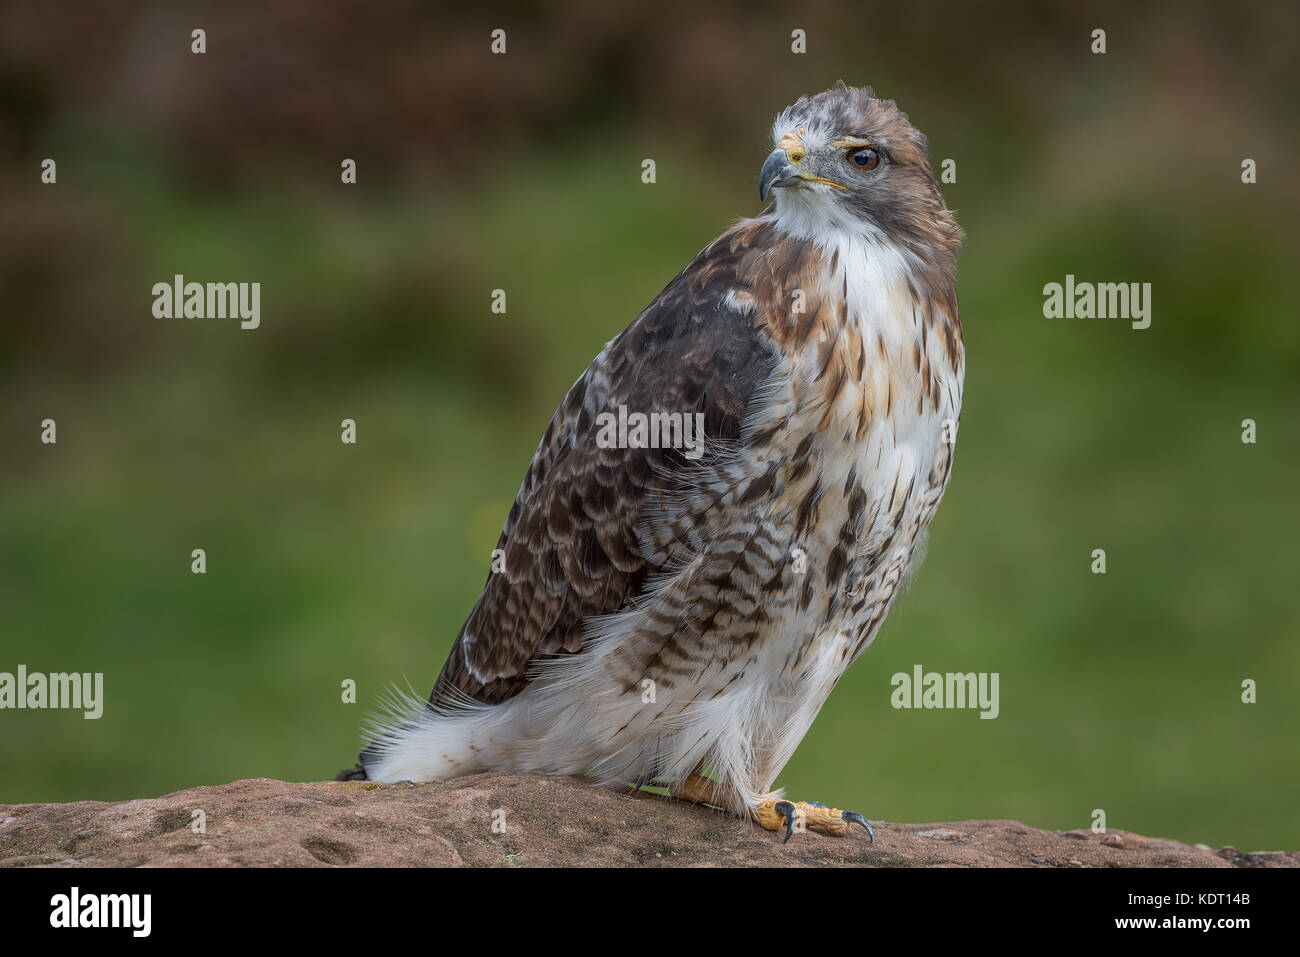 Full length portrait of a red tailed hawk perched on a rock and looking over its shoulder to the left Stock Photo